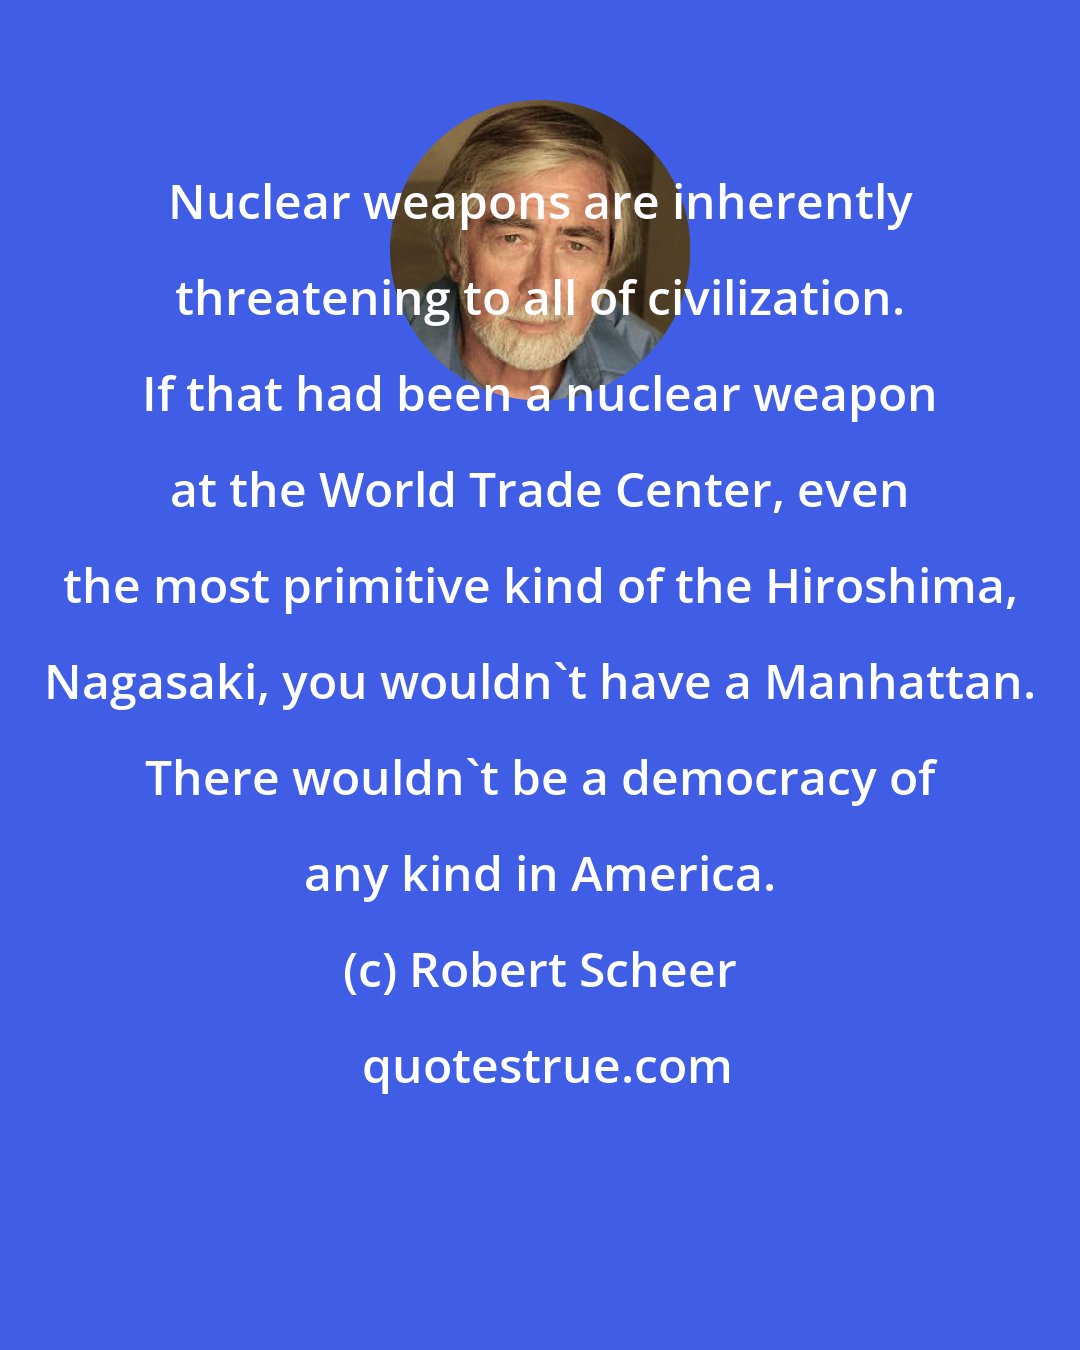 Robert Scheer: Nuclear weapons are inherently threatening to all of civilization. If that had been a nuclear weapon at the World Trade Center, even the most primitive kind of the Hiroshima, Nagasaki, you wouldn't have a Manhattan. There wouldn't be a democracy of any kind in America.